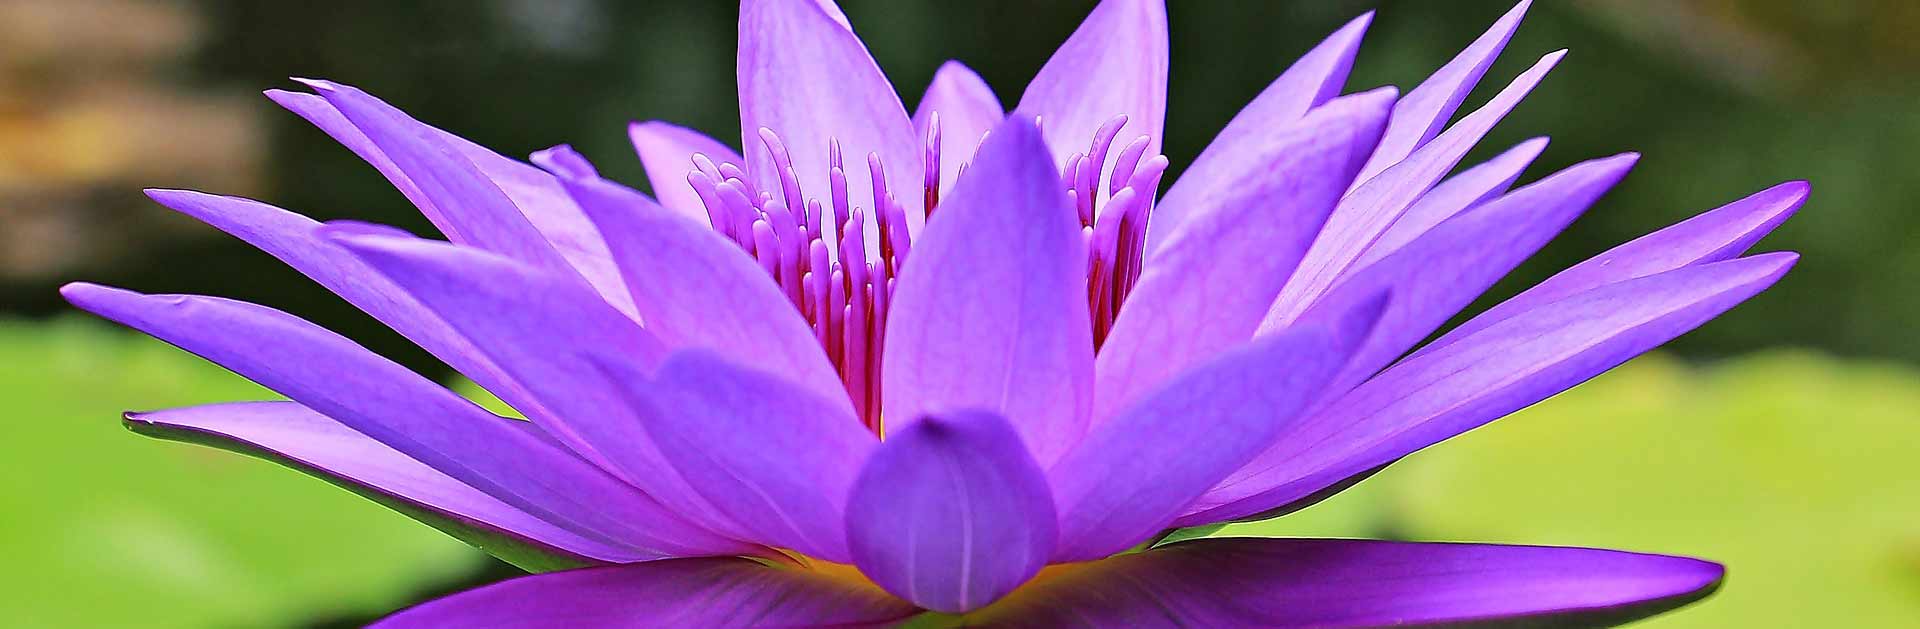 water-lily-1585178_1920-crop